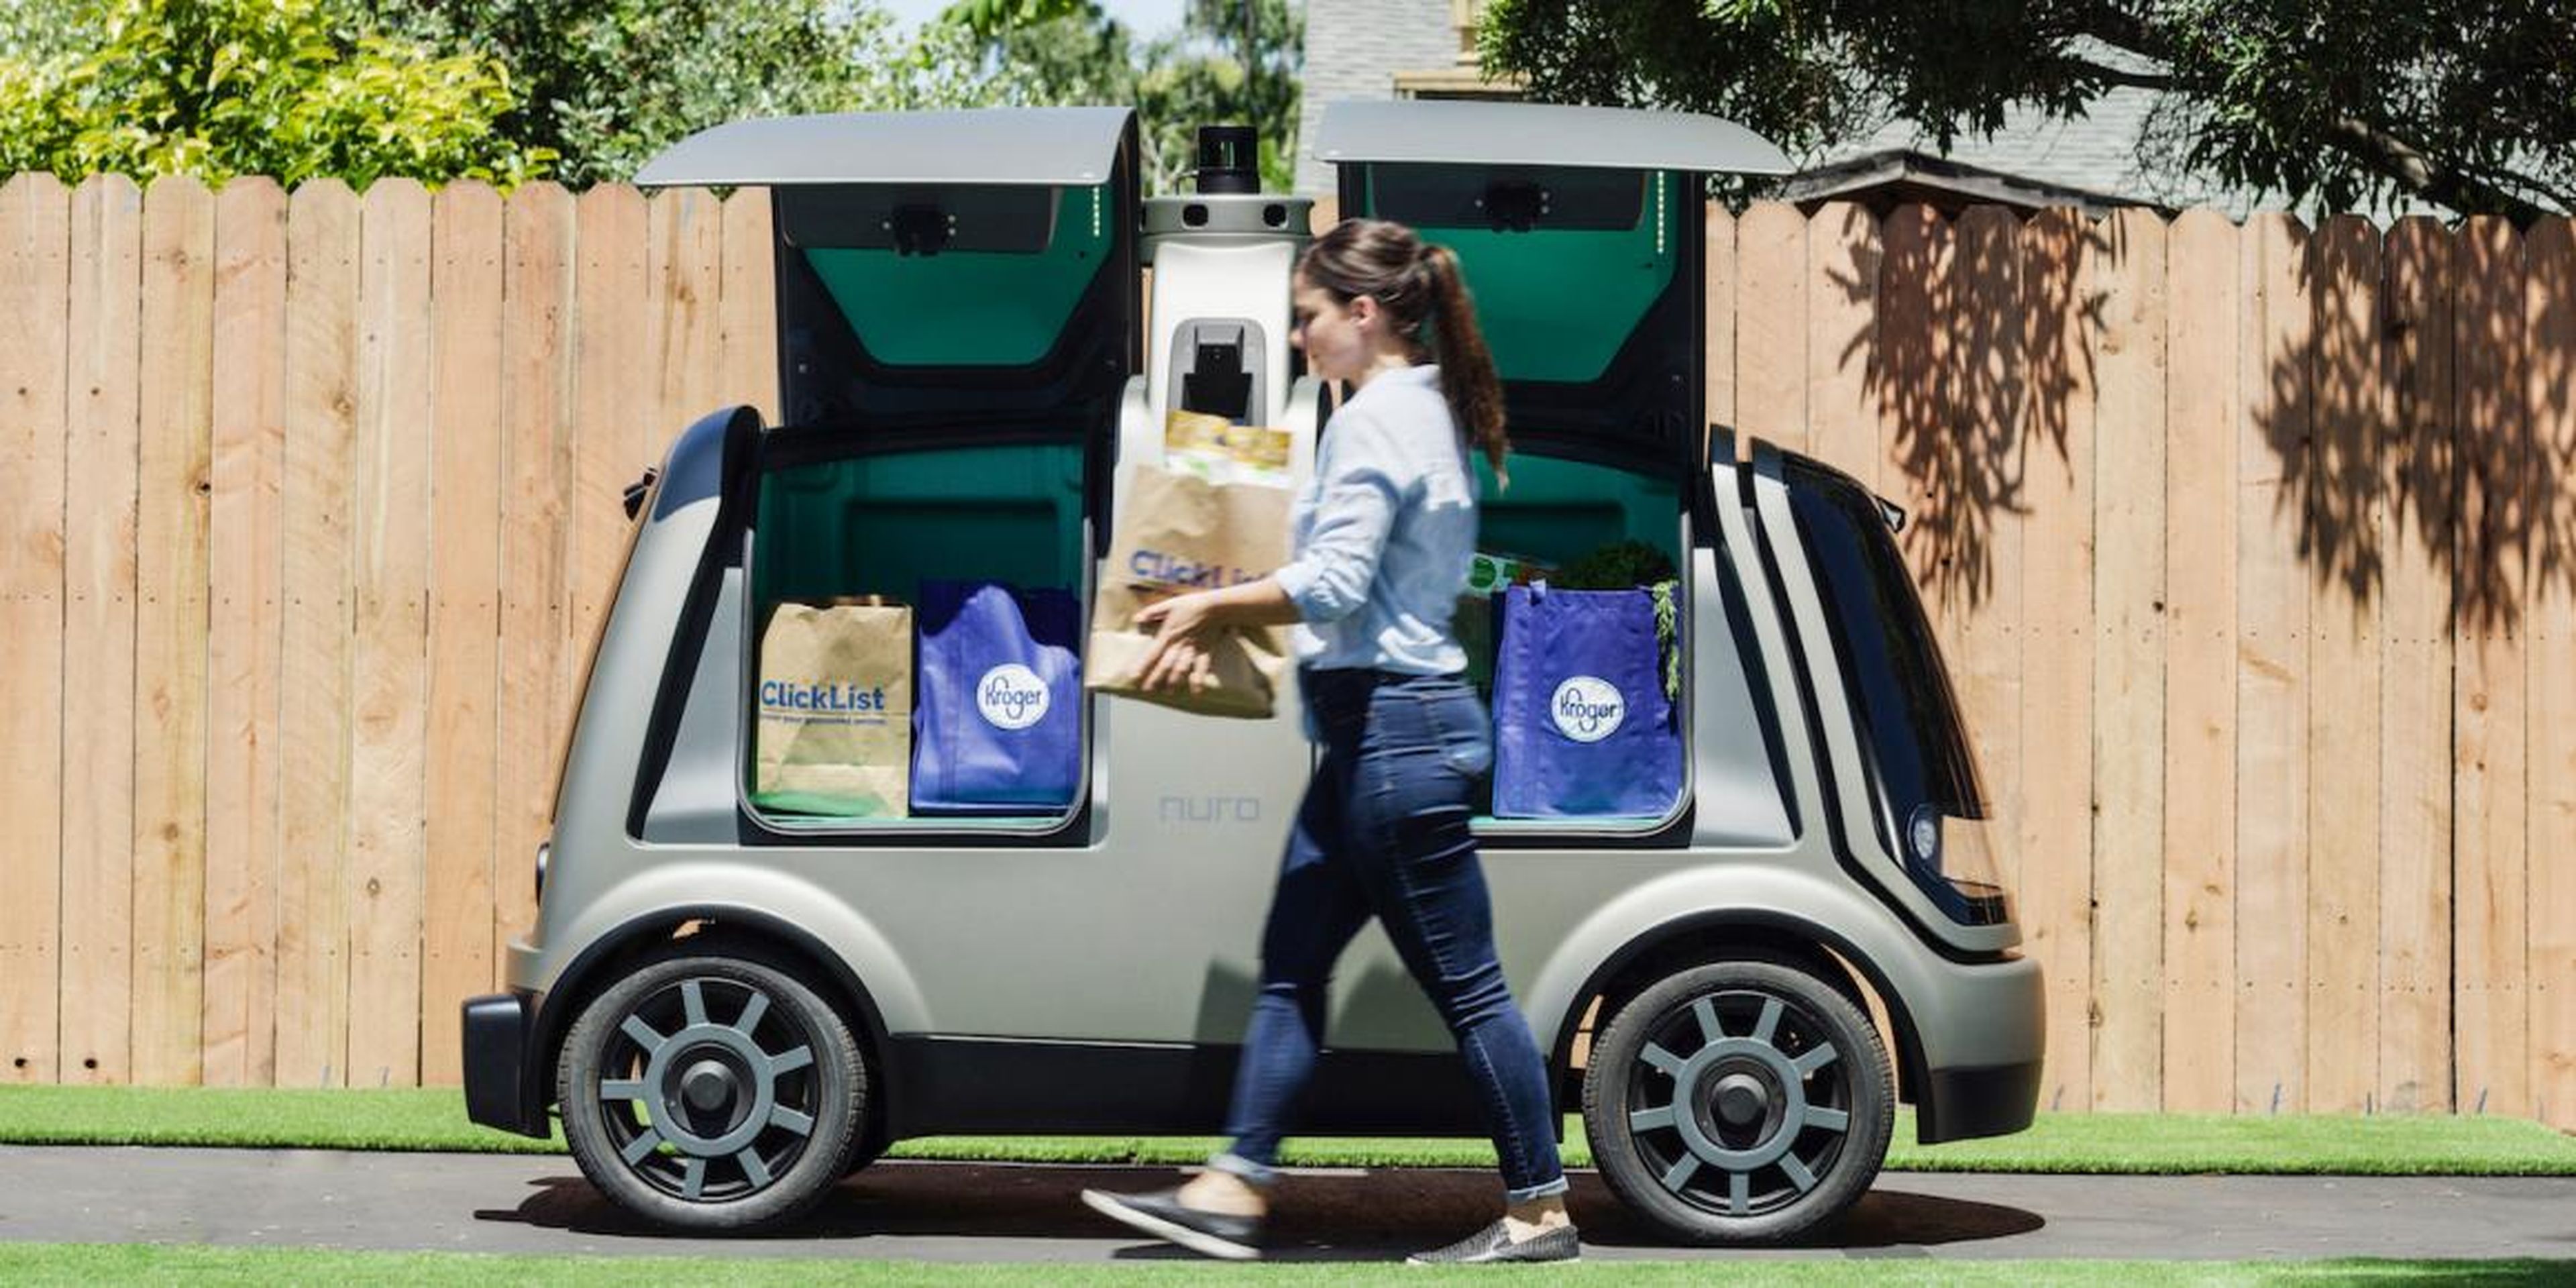 The grocery chain Kroger has partnered with autonomous vehicle company Nuro on deliveries in Arizona.